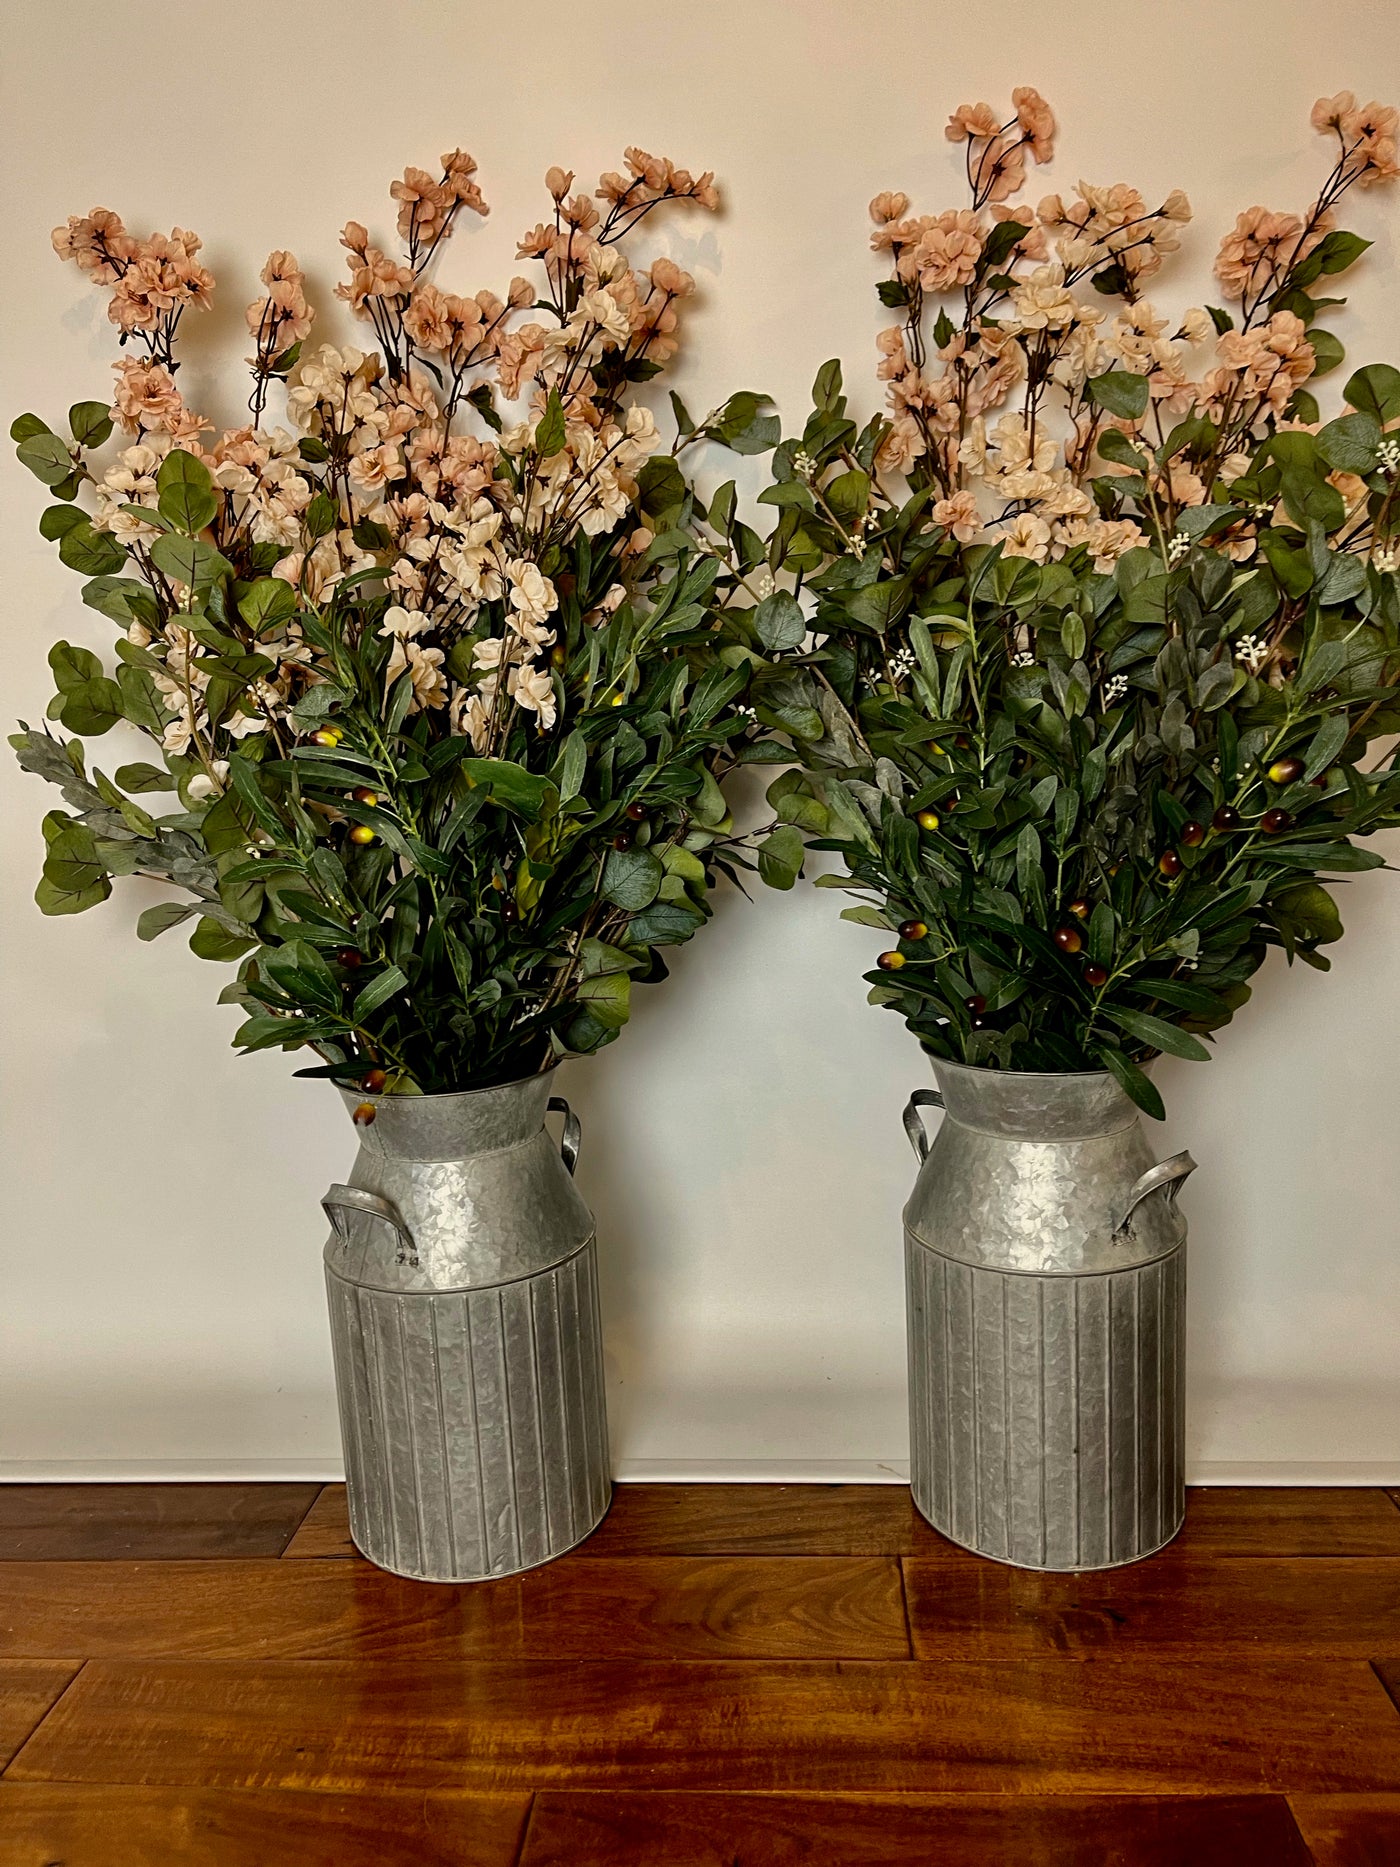 These two galvanized steel milk containers can come filled with either eucalyptus accompanied by small beige and pale pink flowers, or eucalyptus alone. Containers are 15" tall, and with the florals are 36" tall.